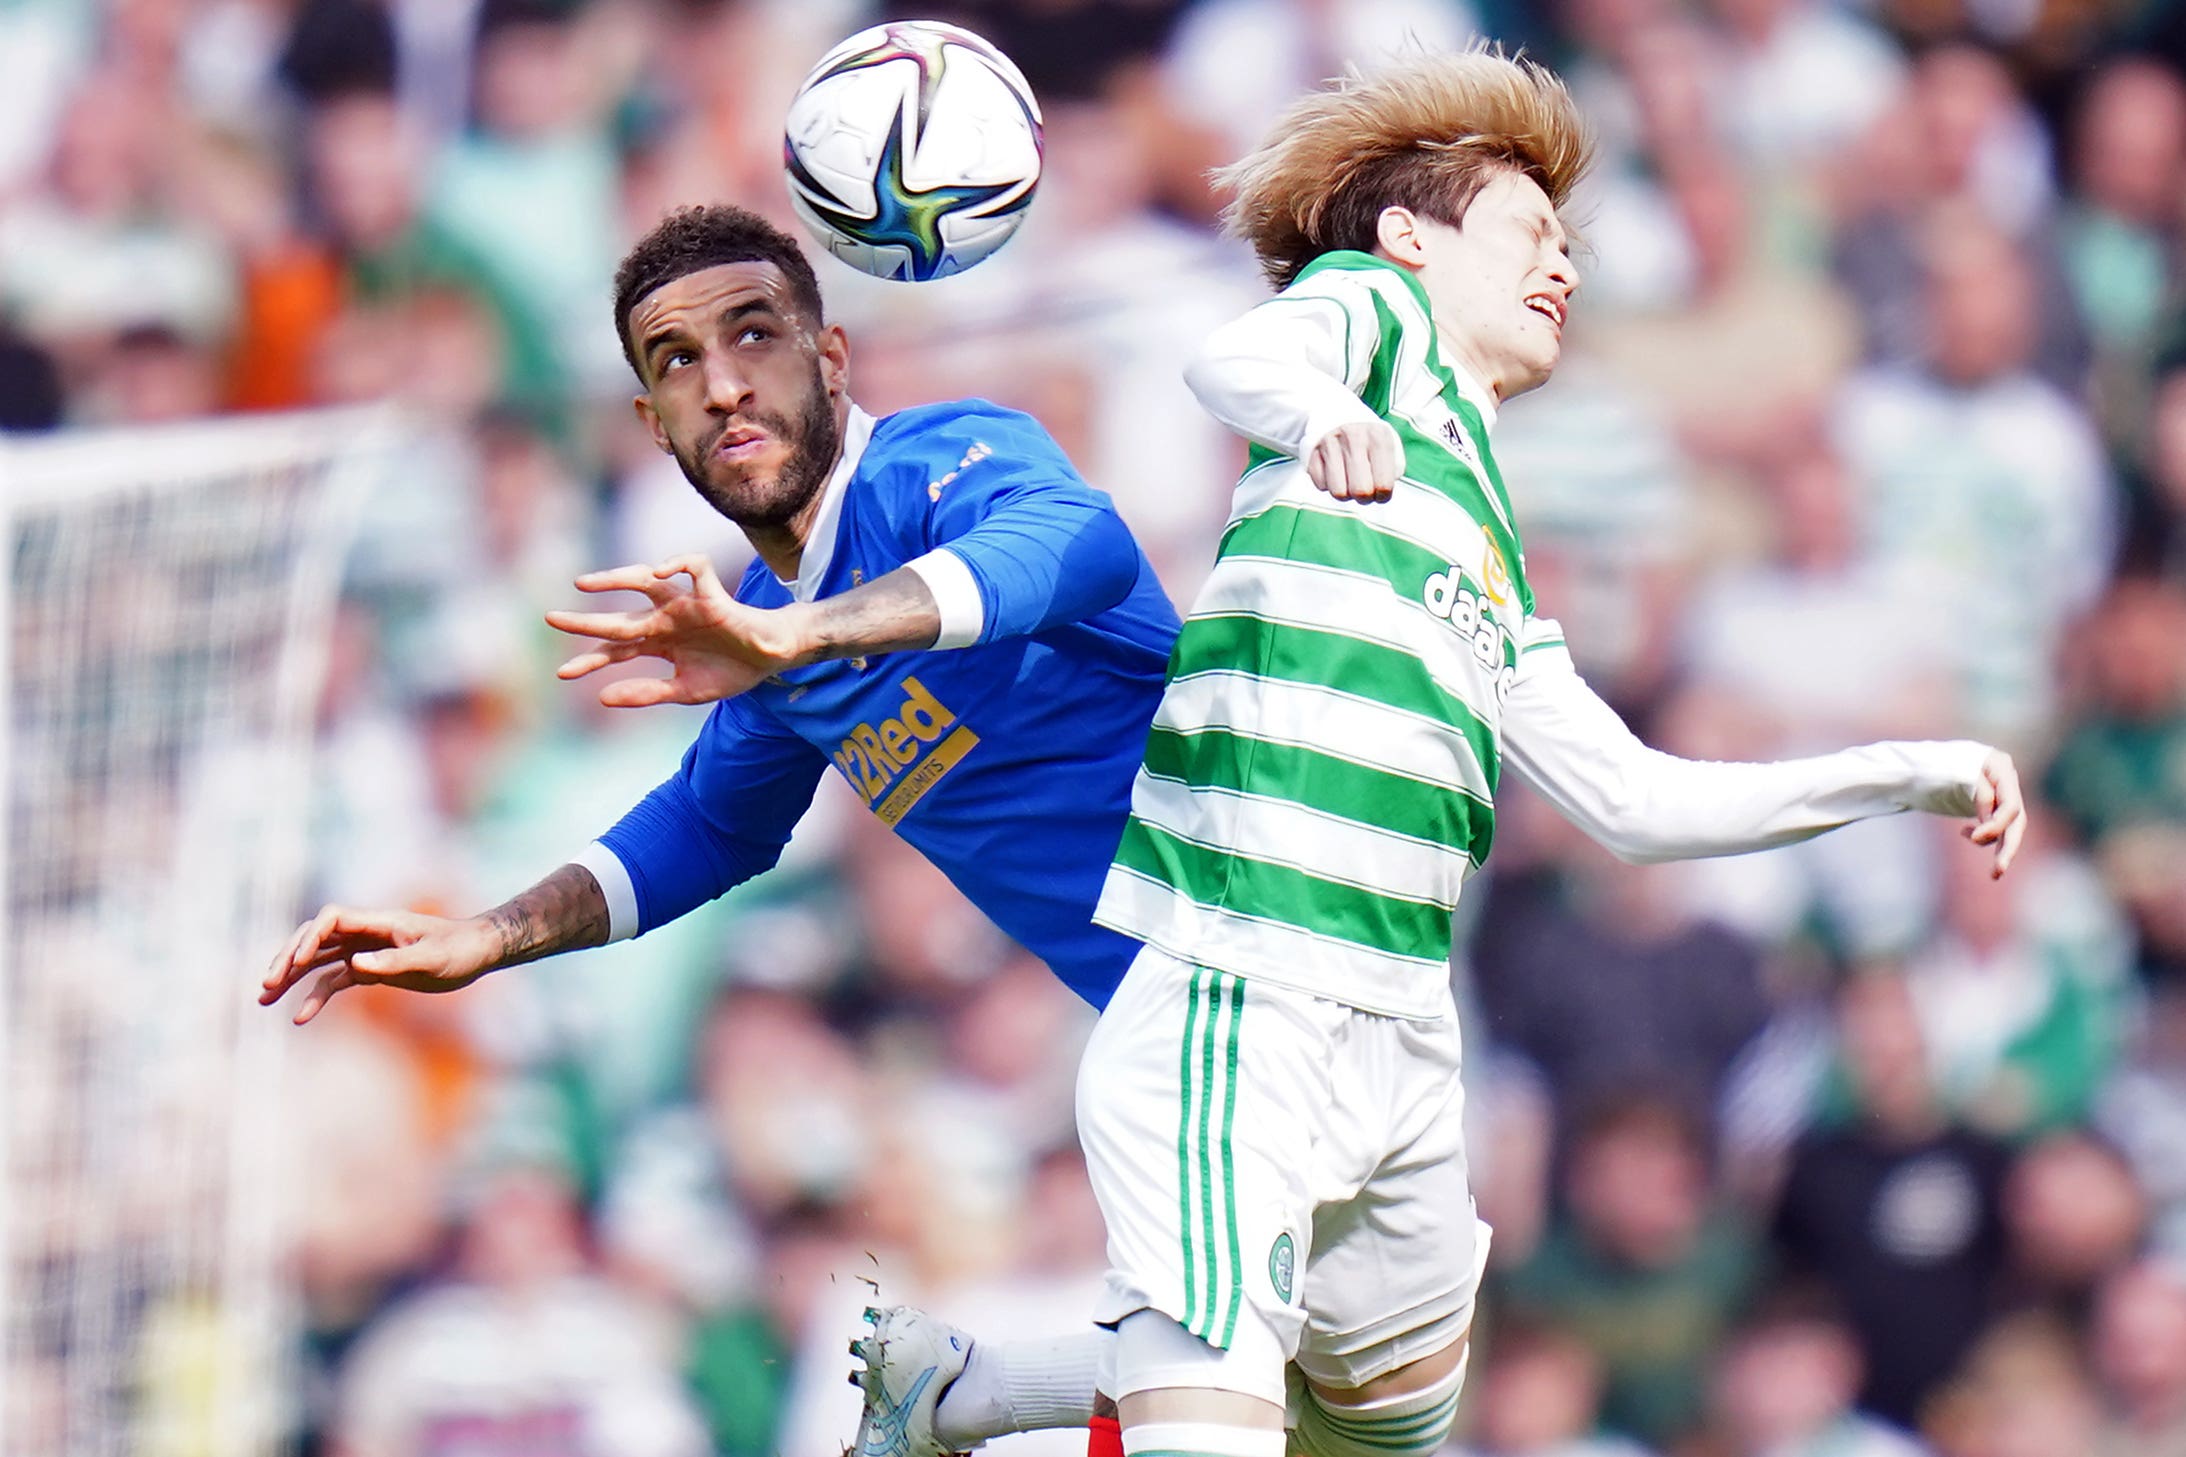 Celtic and Rangers go head to head at Hampden (Jane Barlow/PA)